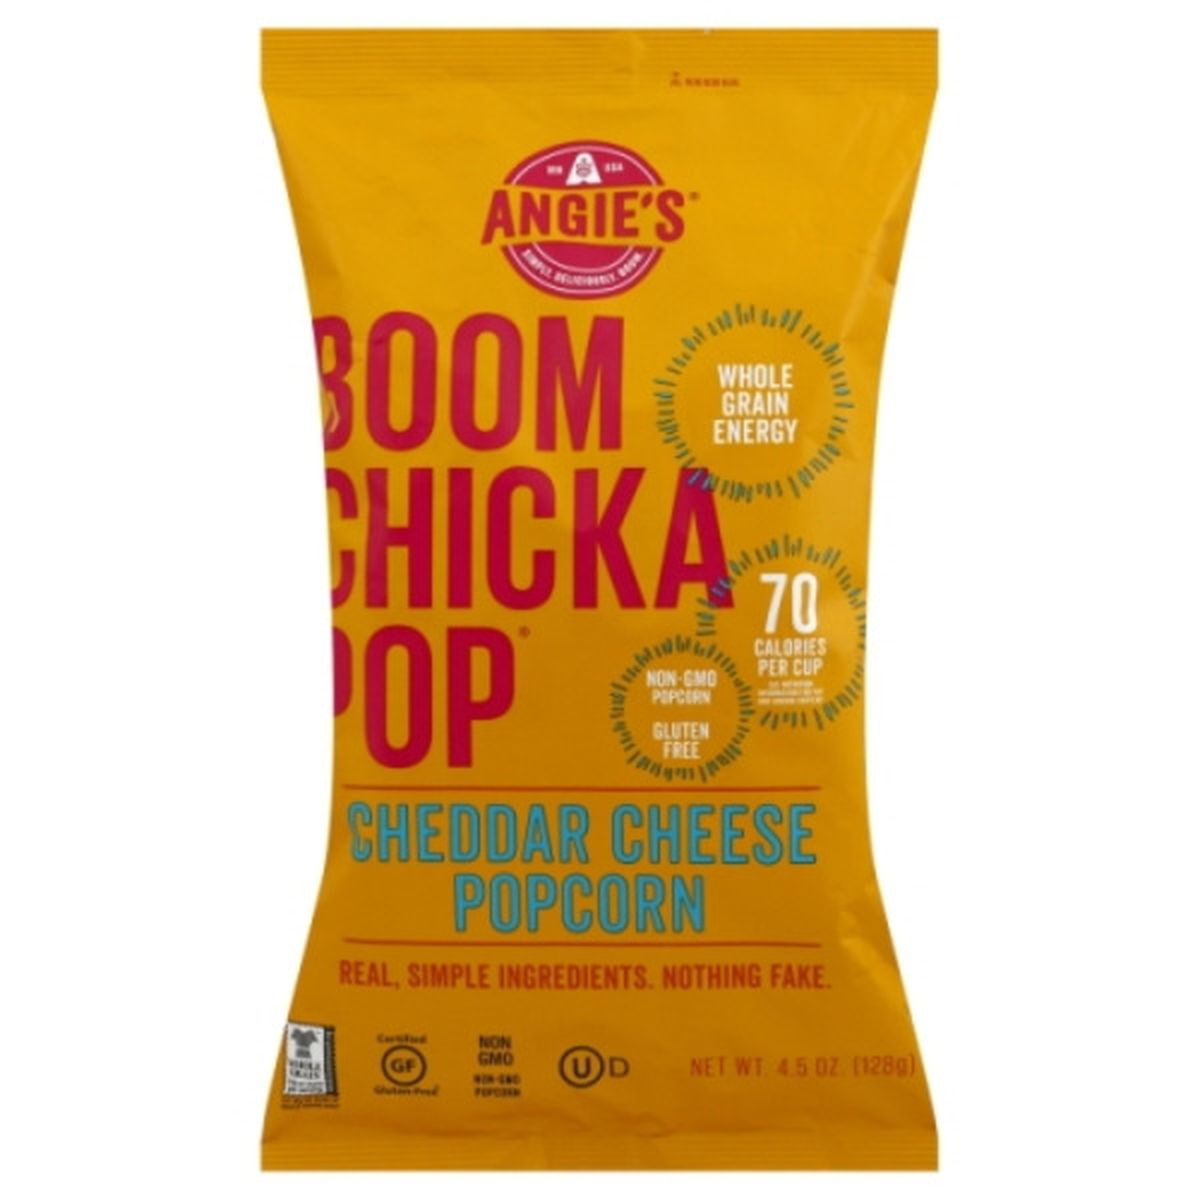 Calories in Angie's Cheddar Cheese Popcorn